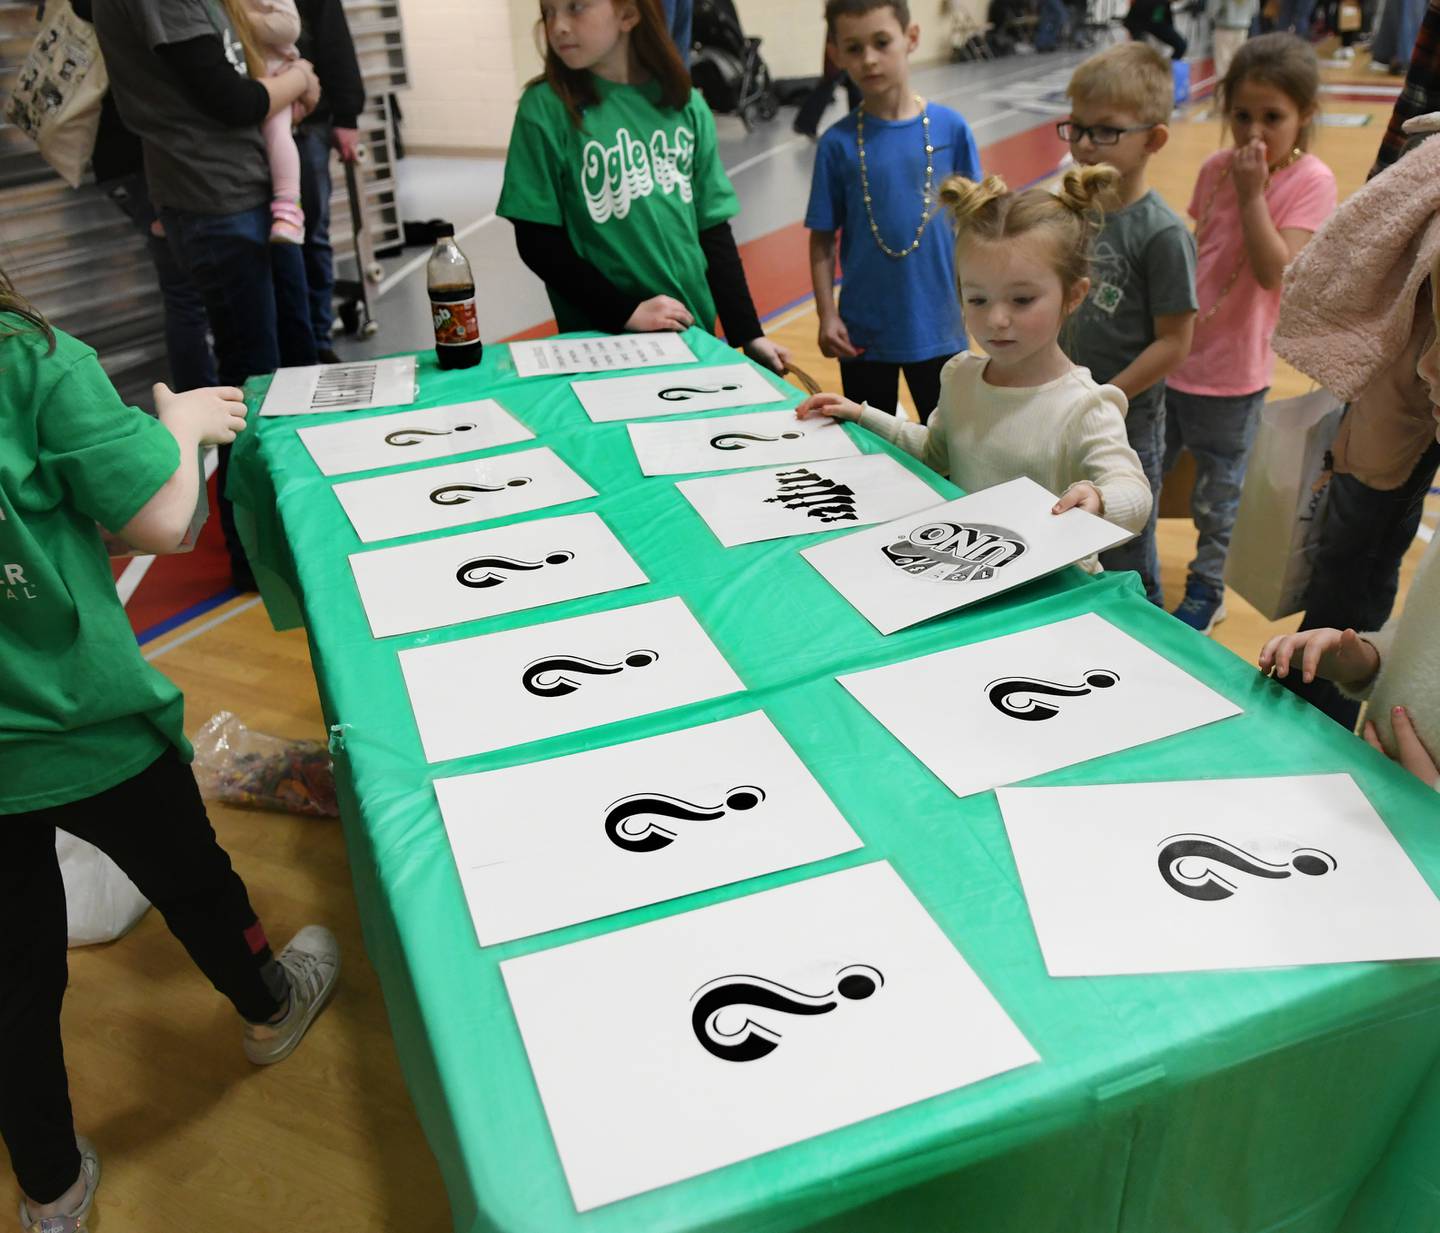 Madilyn Deraitus, 4, of Forreston, plays a memory game at the Carefree 4-H Club's game at the 4-H Penny Carnival on Saturday, March 18.